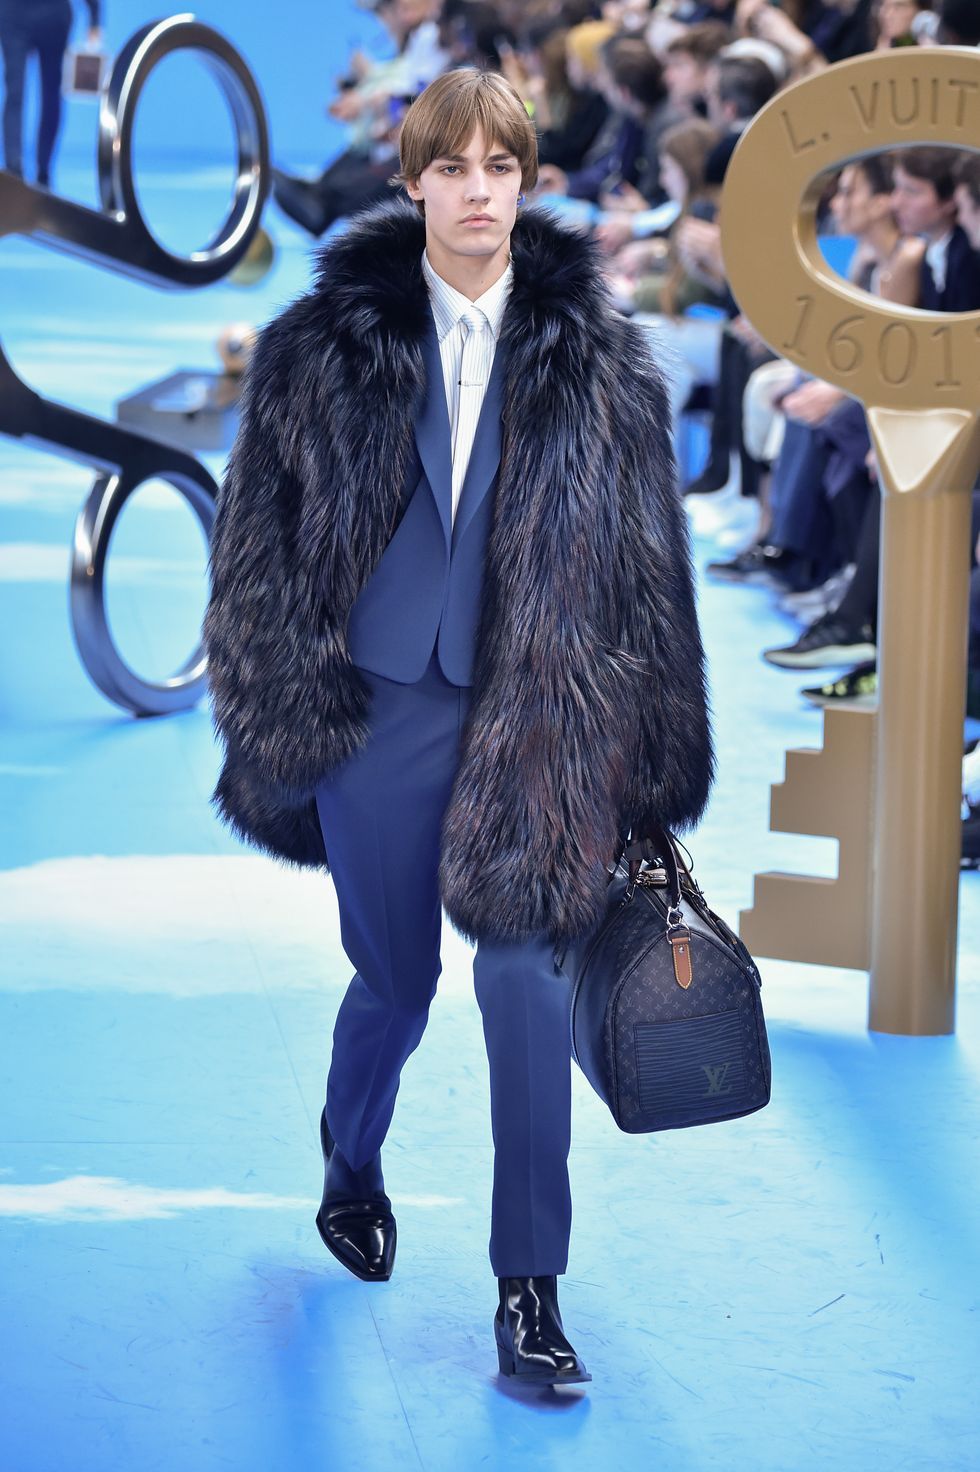 The Best Looks From Virgil Abloh's A/W '20 Louis Vuitton Show